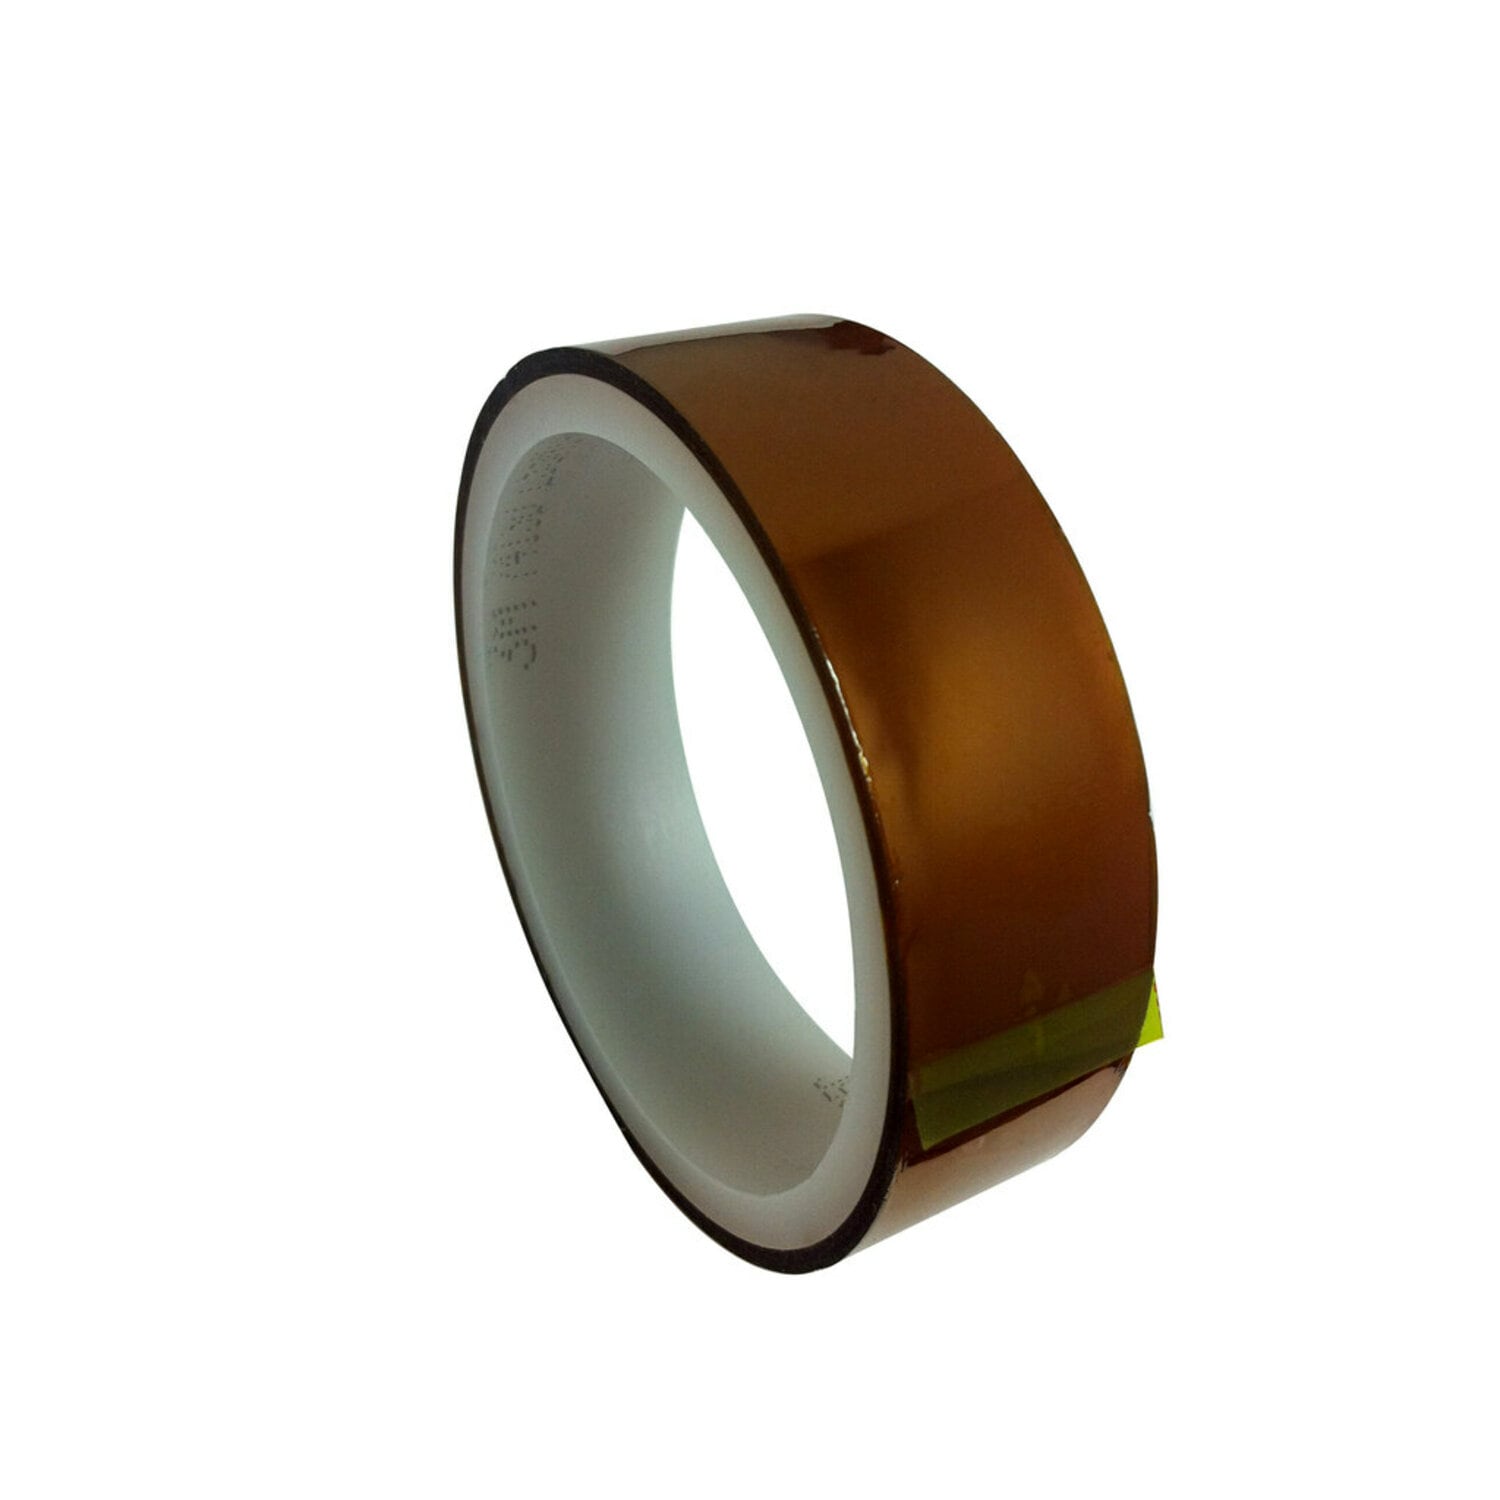 7100179851 - 3M Low-Static Polyimide Film Tape 7419, Roll, Configurable Product